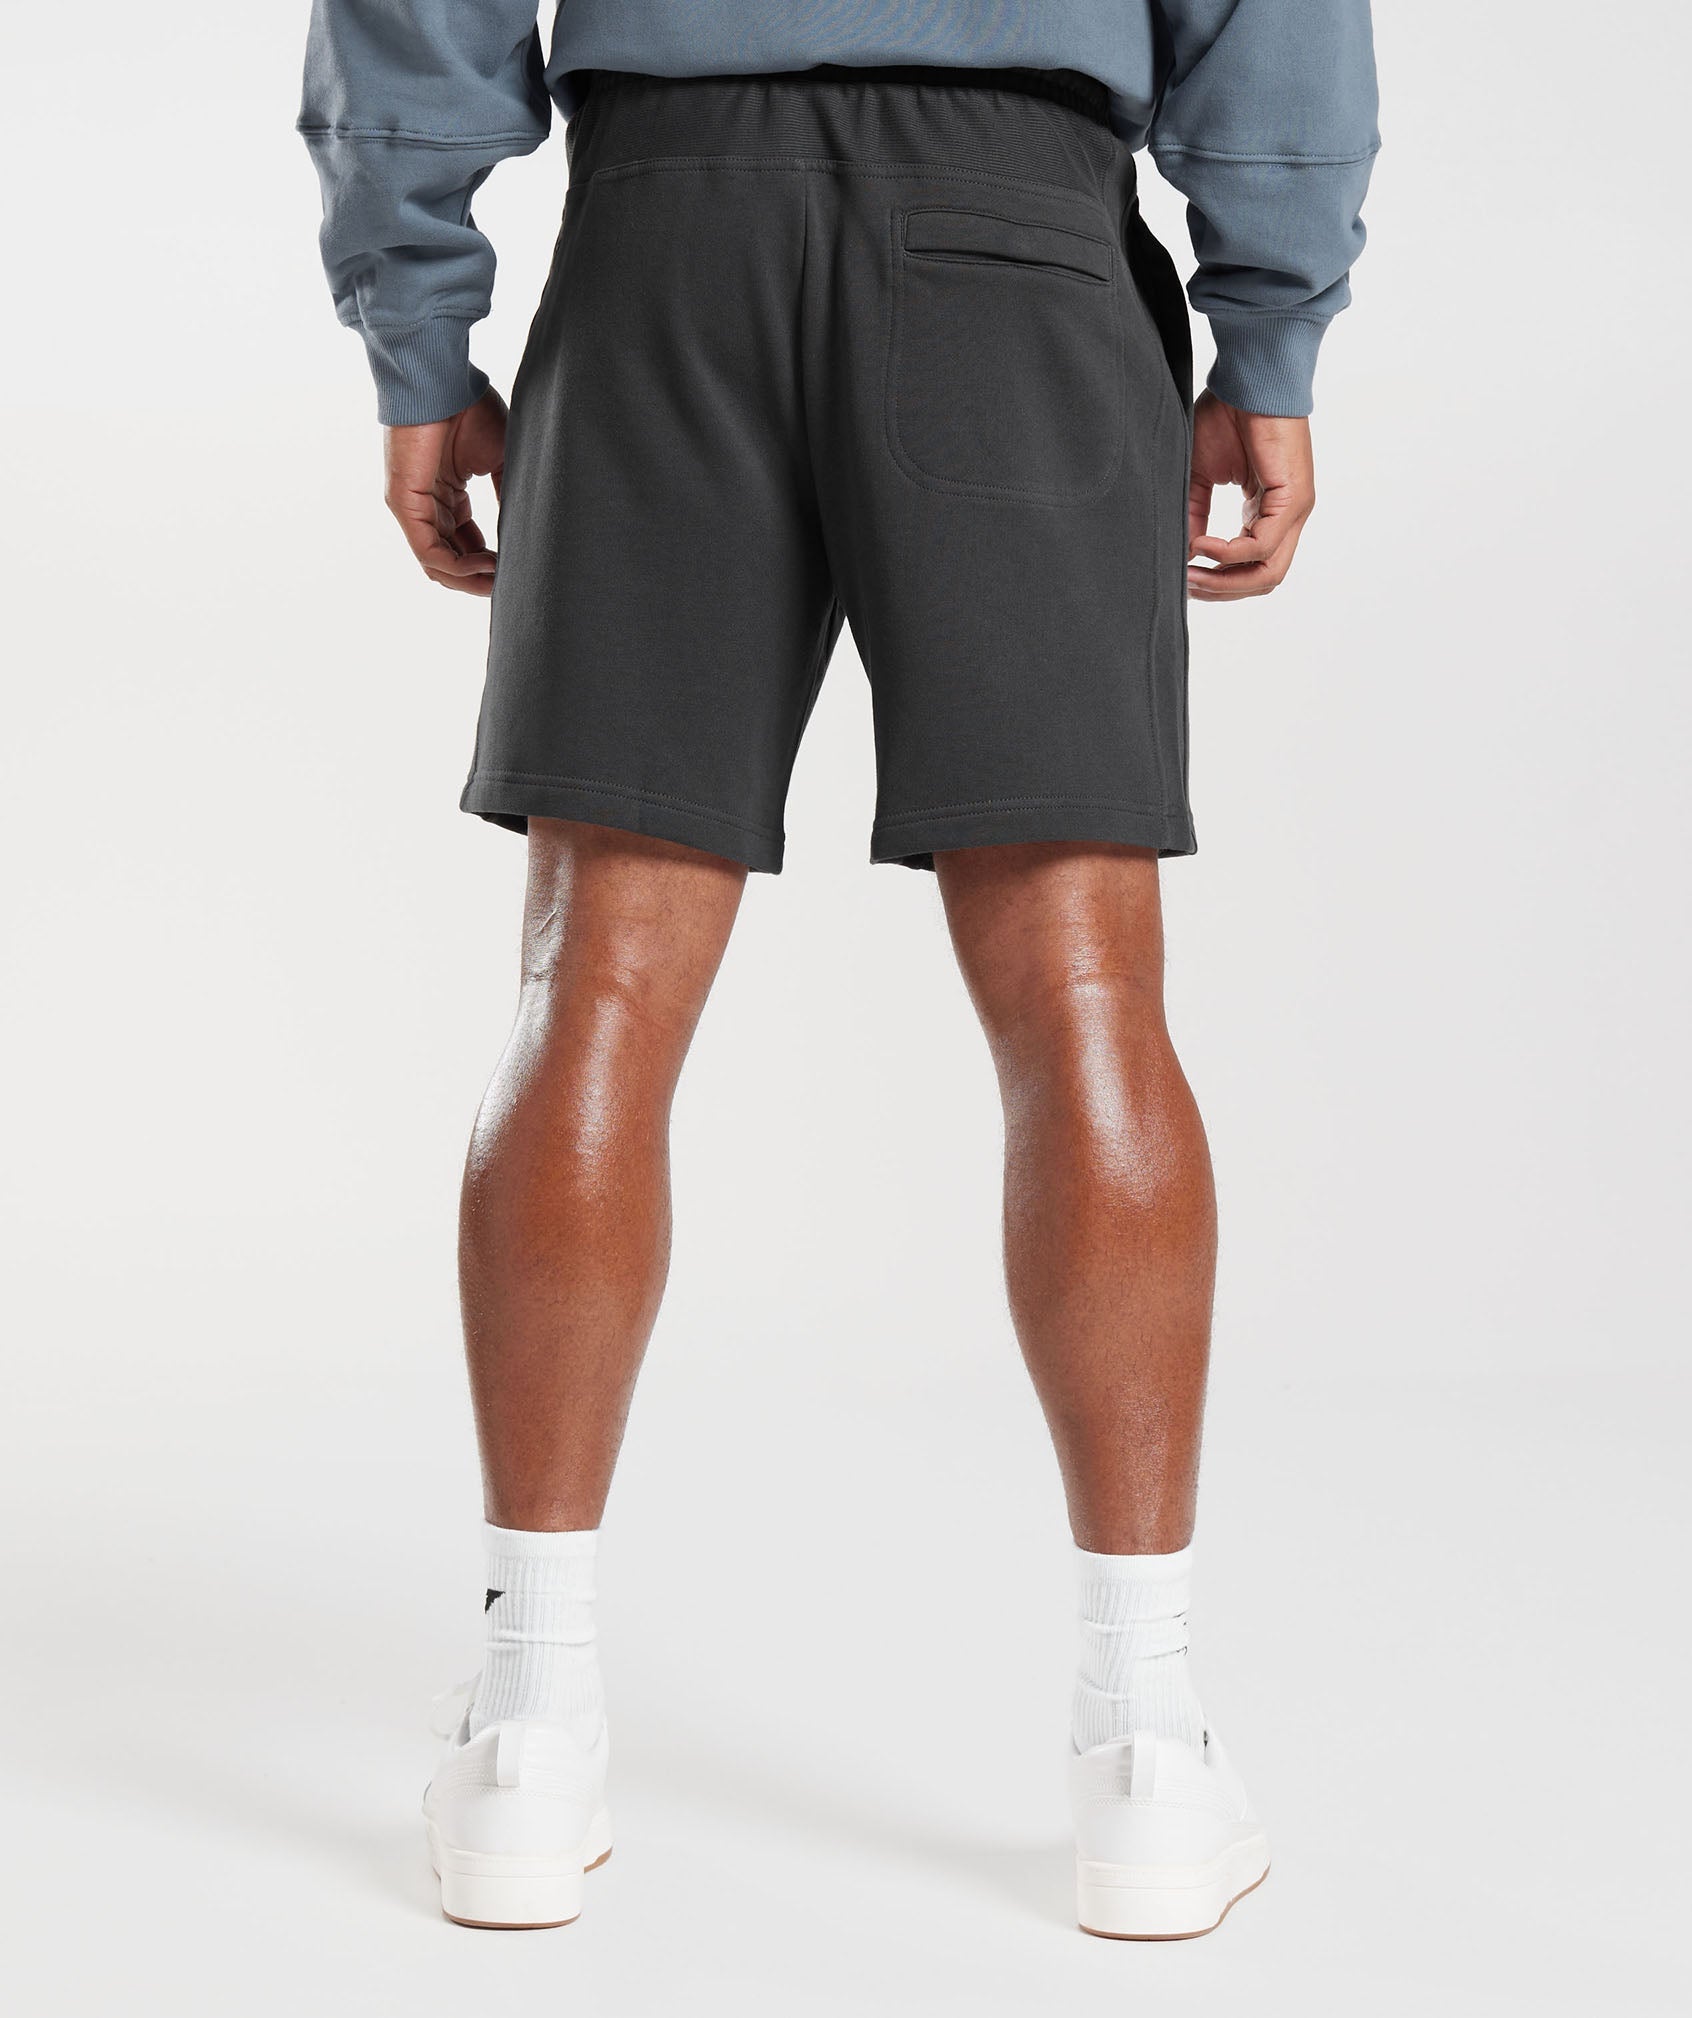 Rest Day Essentials 7" Shorts in Onyx Grey - view 2